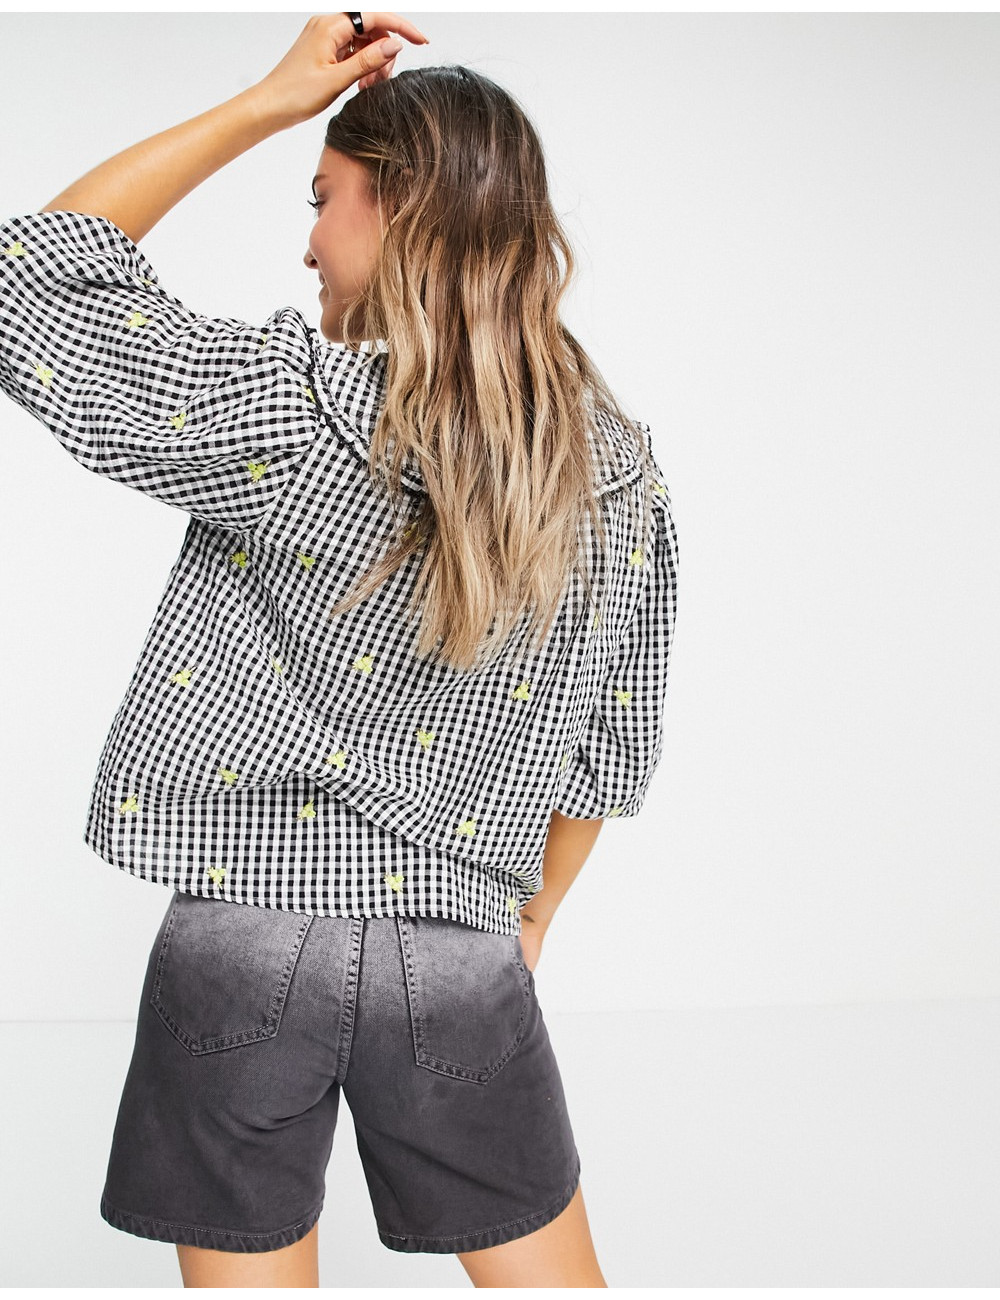 New Look gingham blouse...